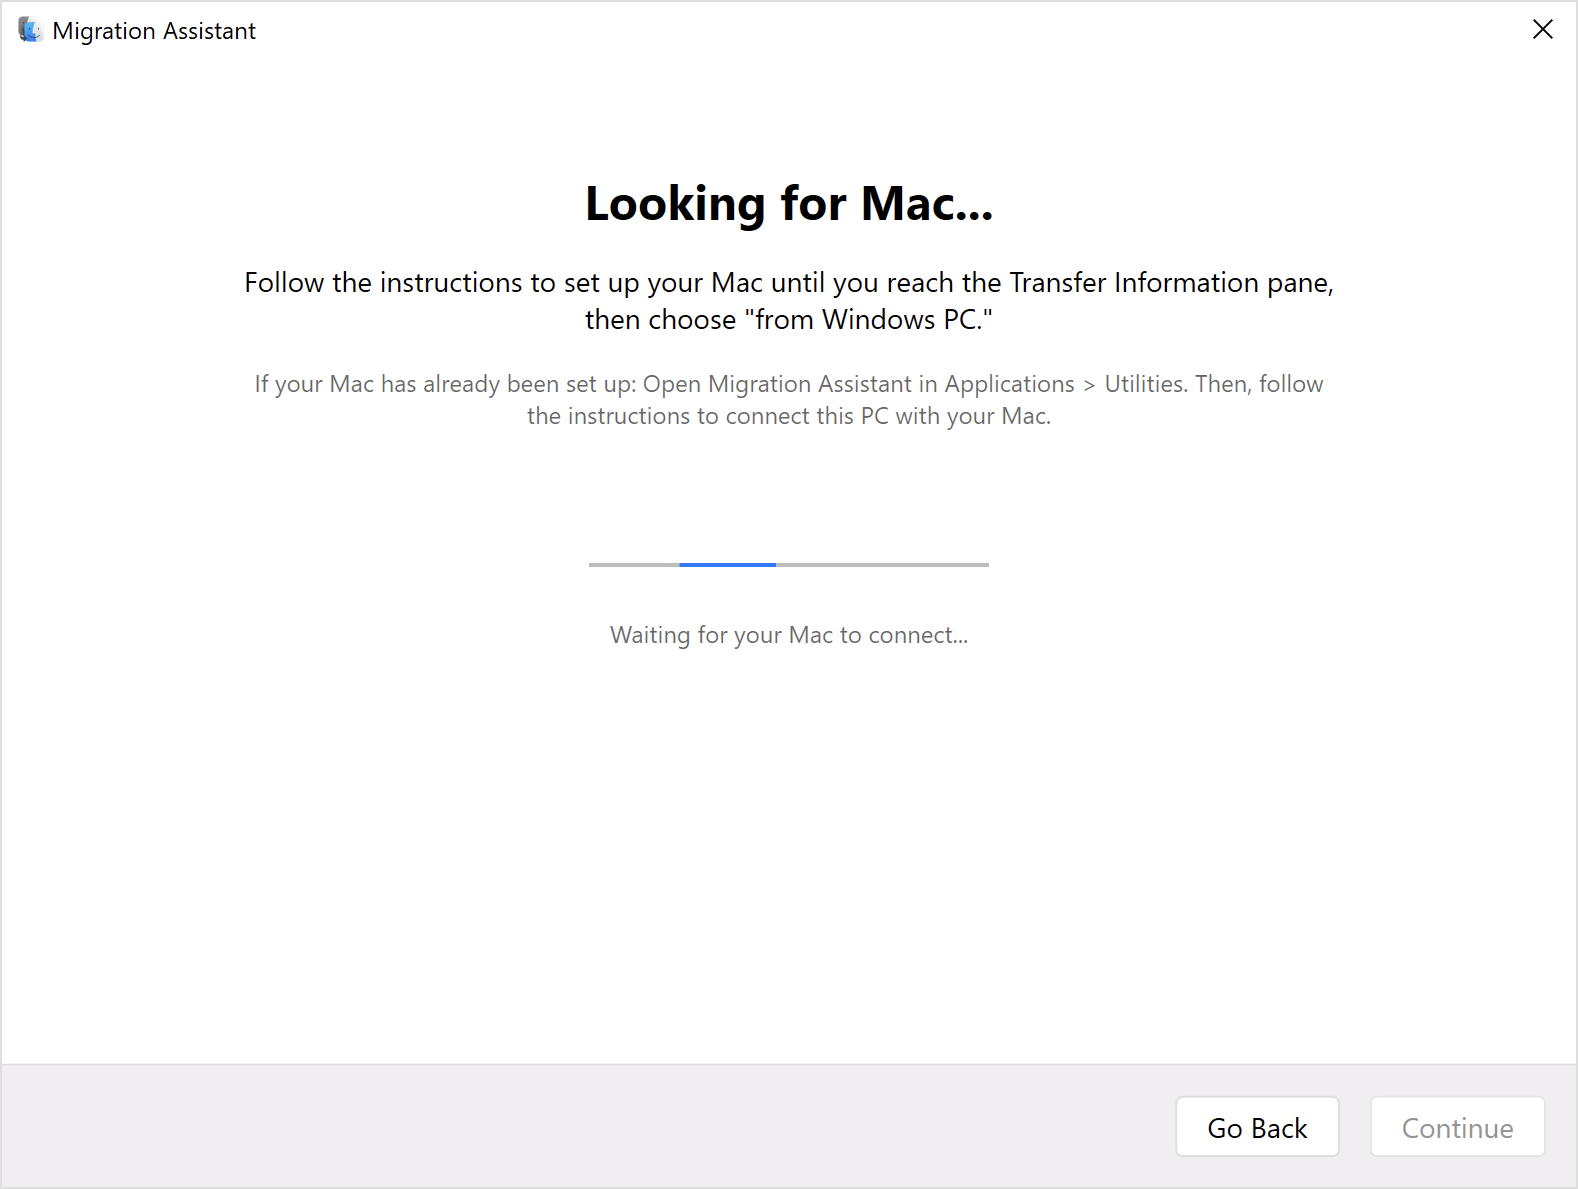 Migration Assistant on PC: Looking for Mac...